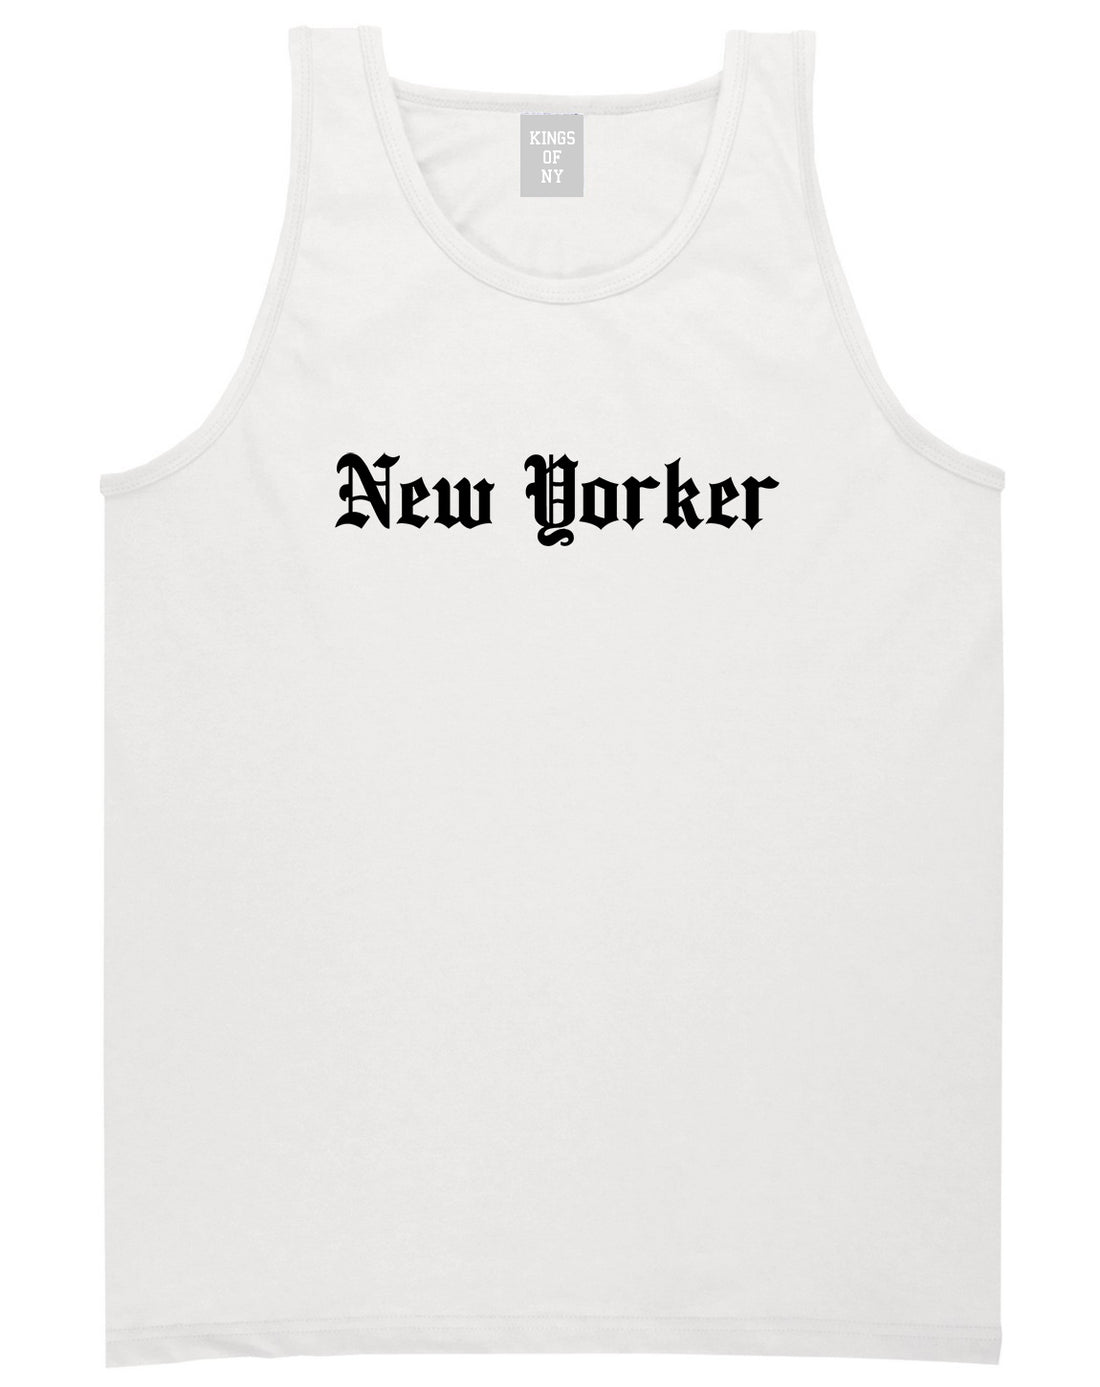 New Yorker Old English Mens Tank Top Shirt White by Kings Of NY